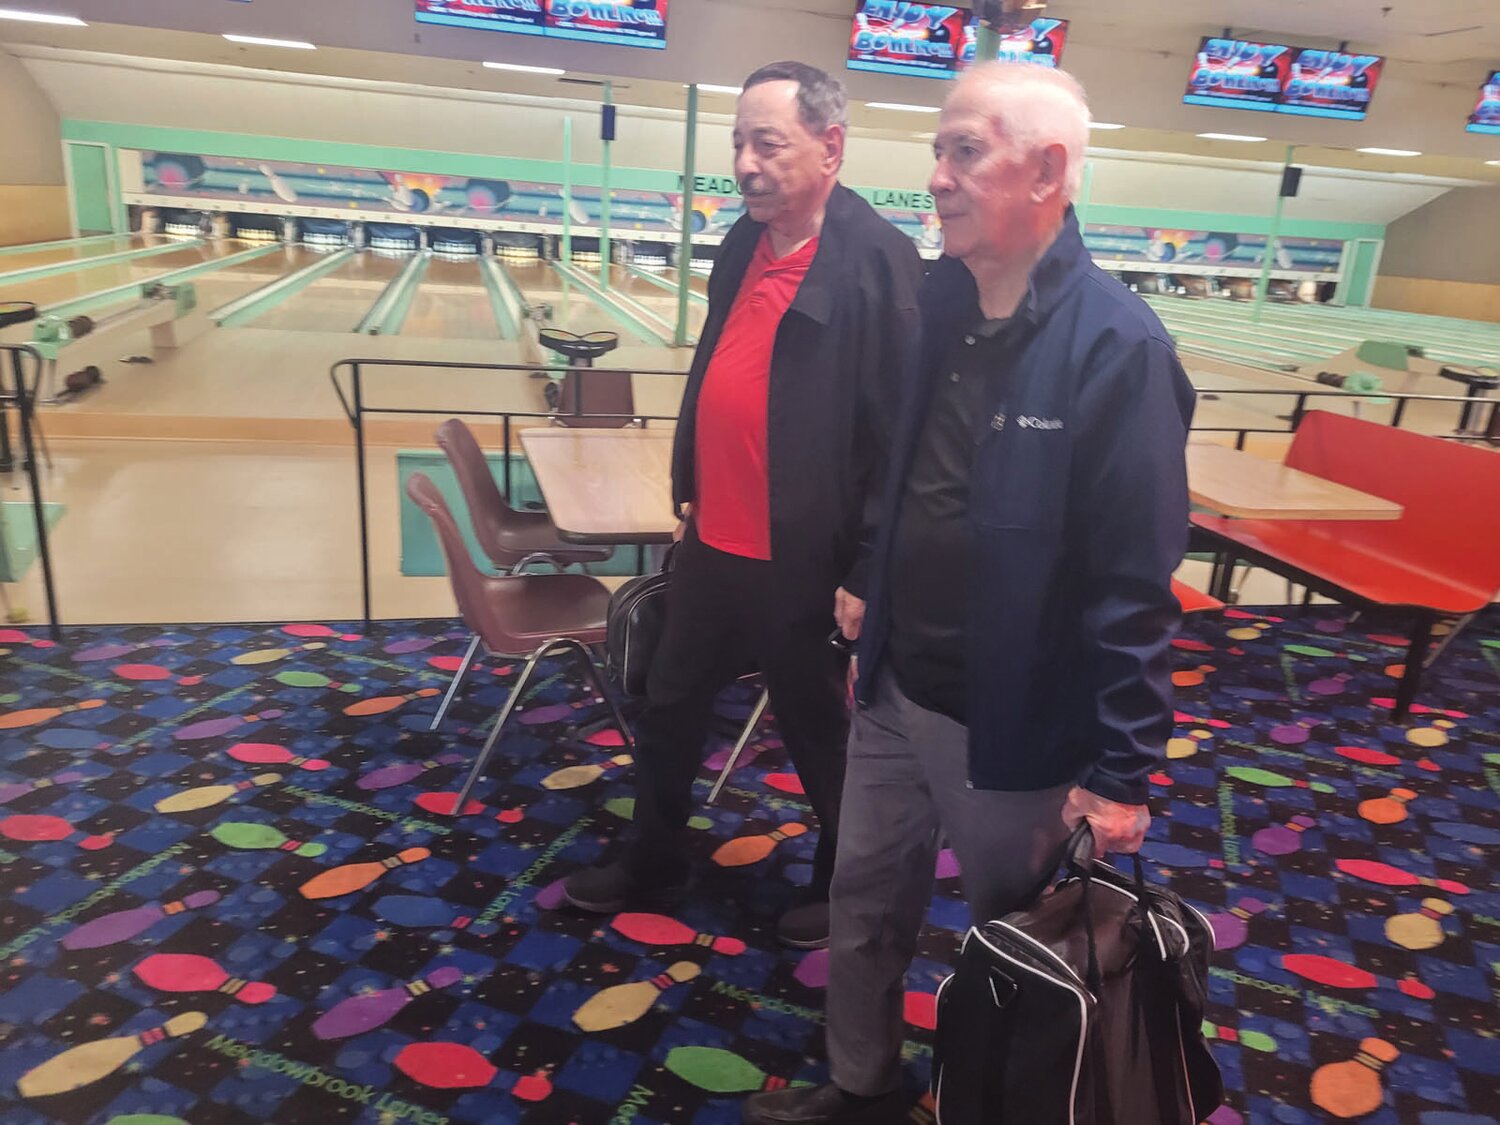 MEMORY LANES: Retired U.S. Army Sgt. John Tammelleo and Corp. Mario DeAngelis, both of Johnston, are bowling buddies and Vietnam War-era veterans. On Sunday, they’ll be among 55 Ocean State veterans aboard a RI Honor Flight to Washington D.C.